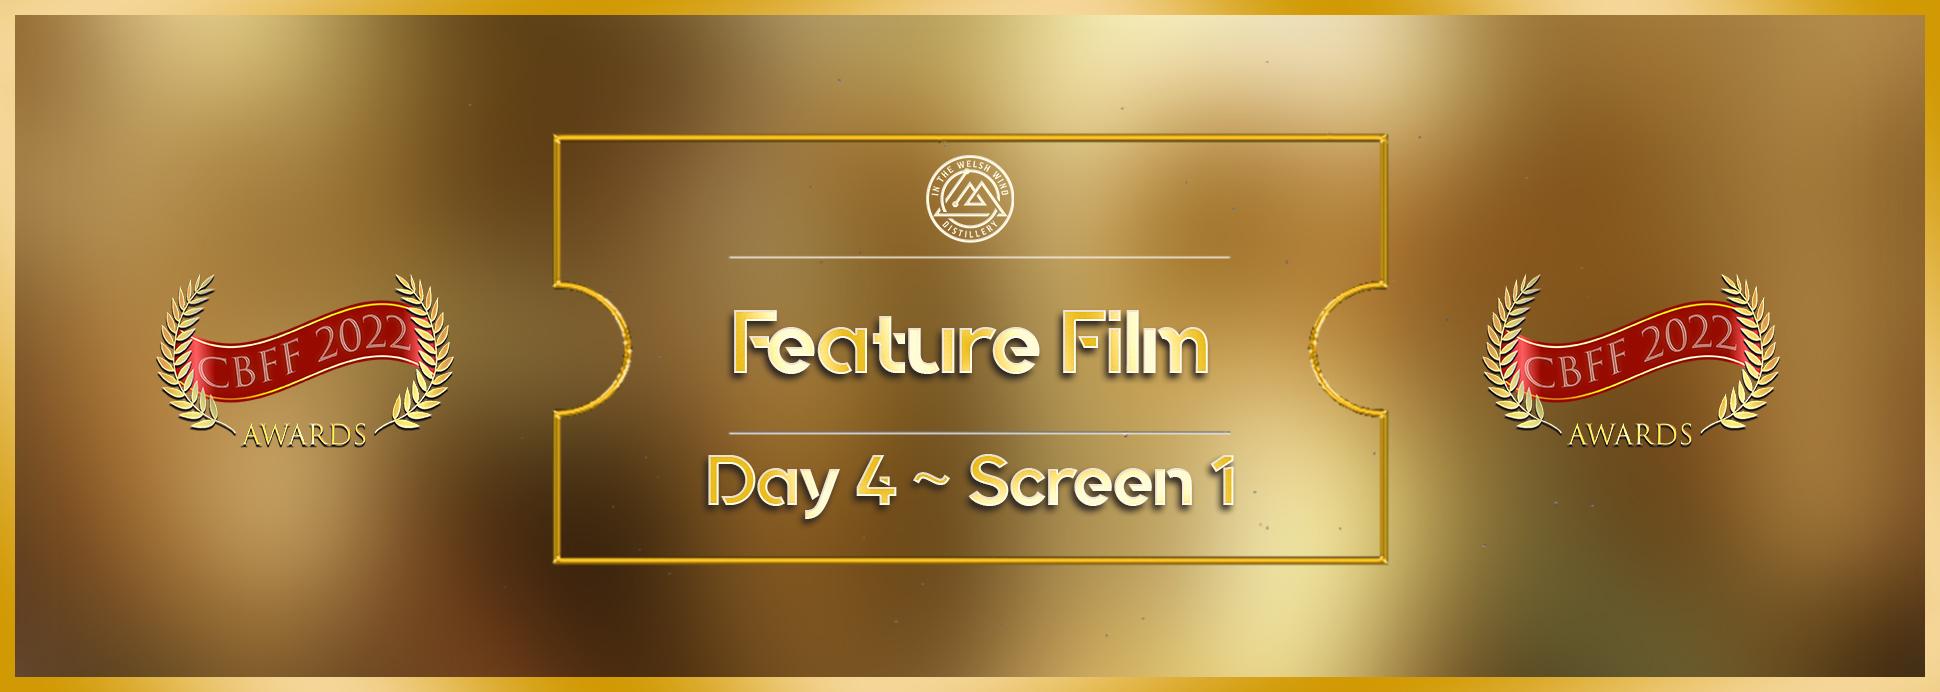 Day 4 Screen 1 Feature Film 